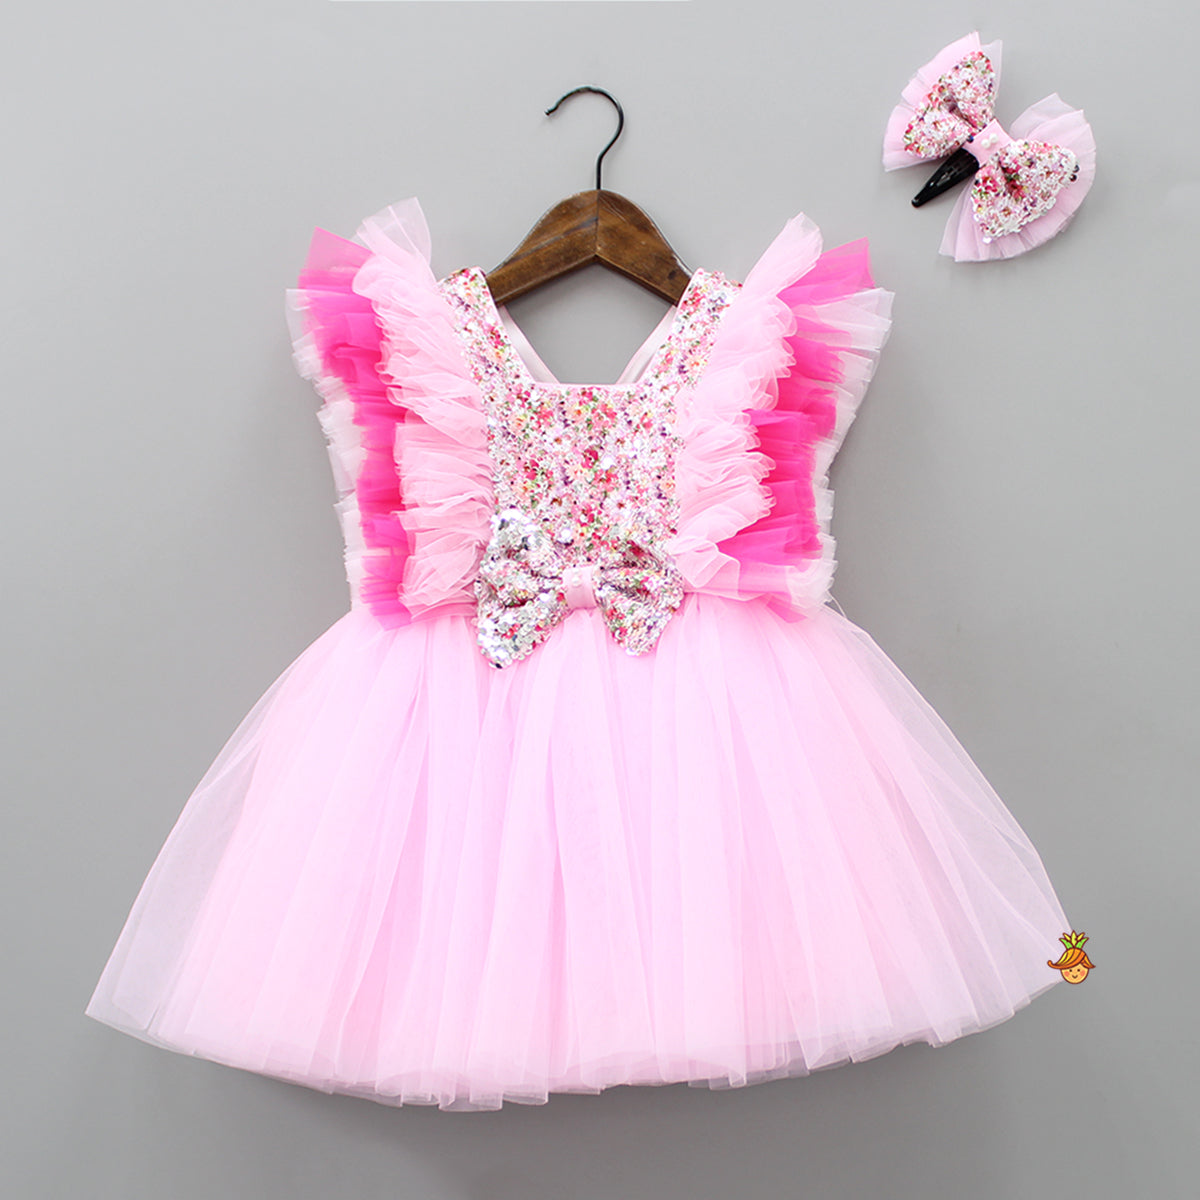 Cute Sequin Work Pink Dress With Hair Clip